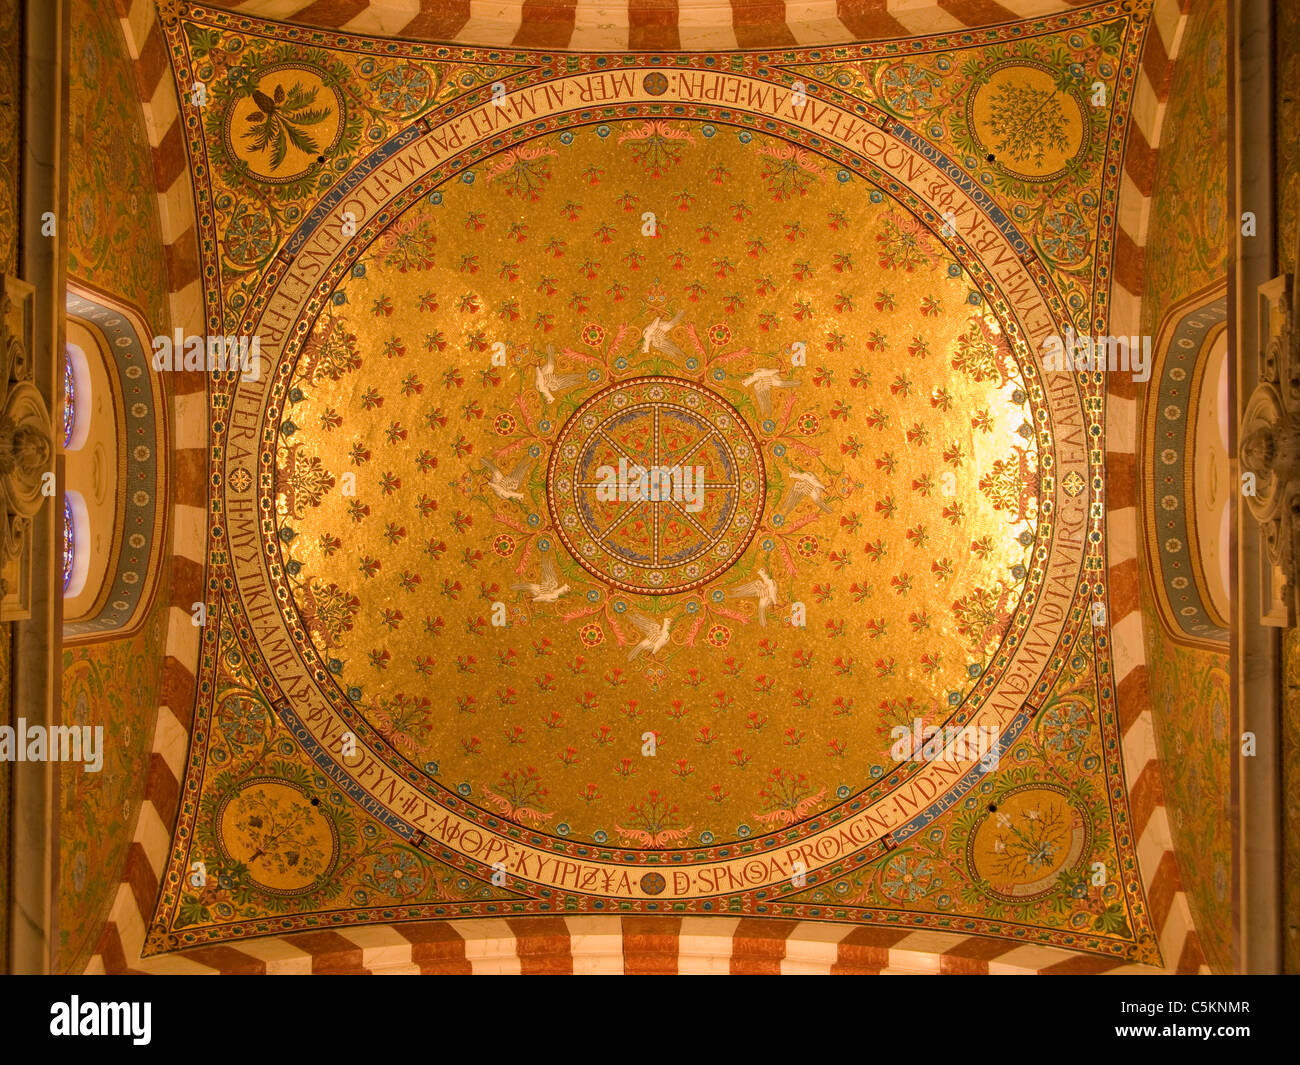 Inside of the main dome at Notre-Dame-de-la-Garde, Marseille, France, with gold tiled mosaic and Greek and Latin inscriptions Stock Photo